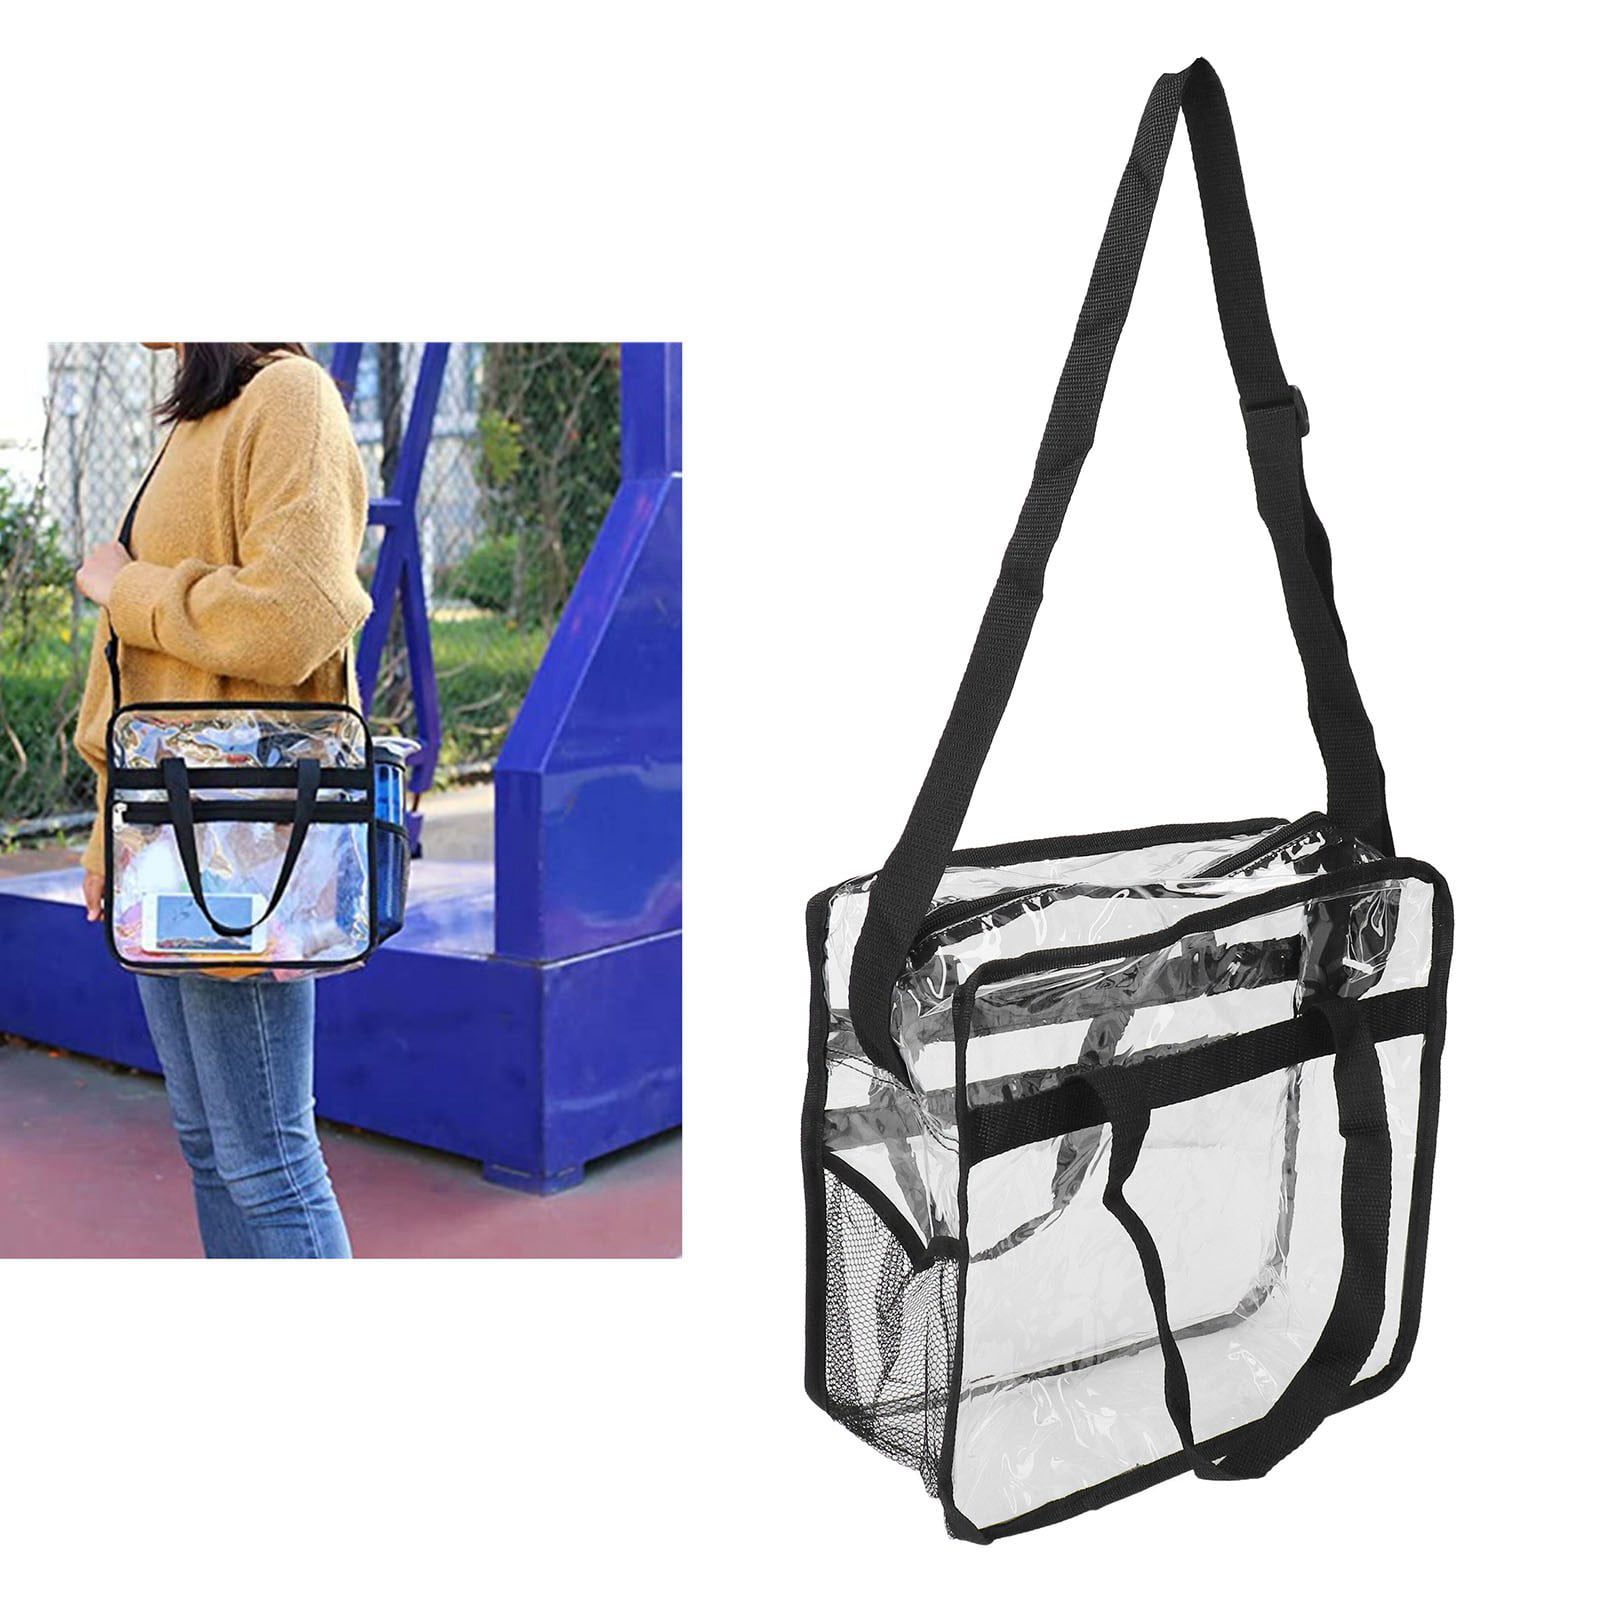 Trendy Visible Clear MULTI COMPARTMENT TOTEBag CH-CW213 > Tote